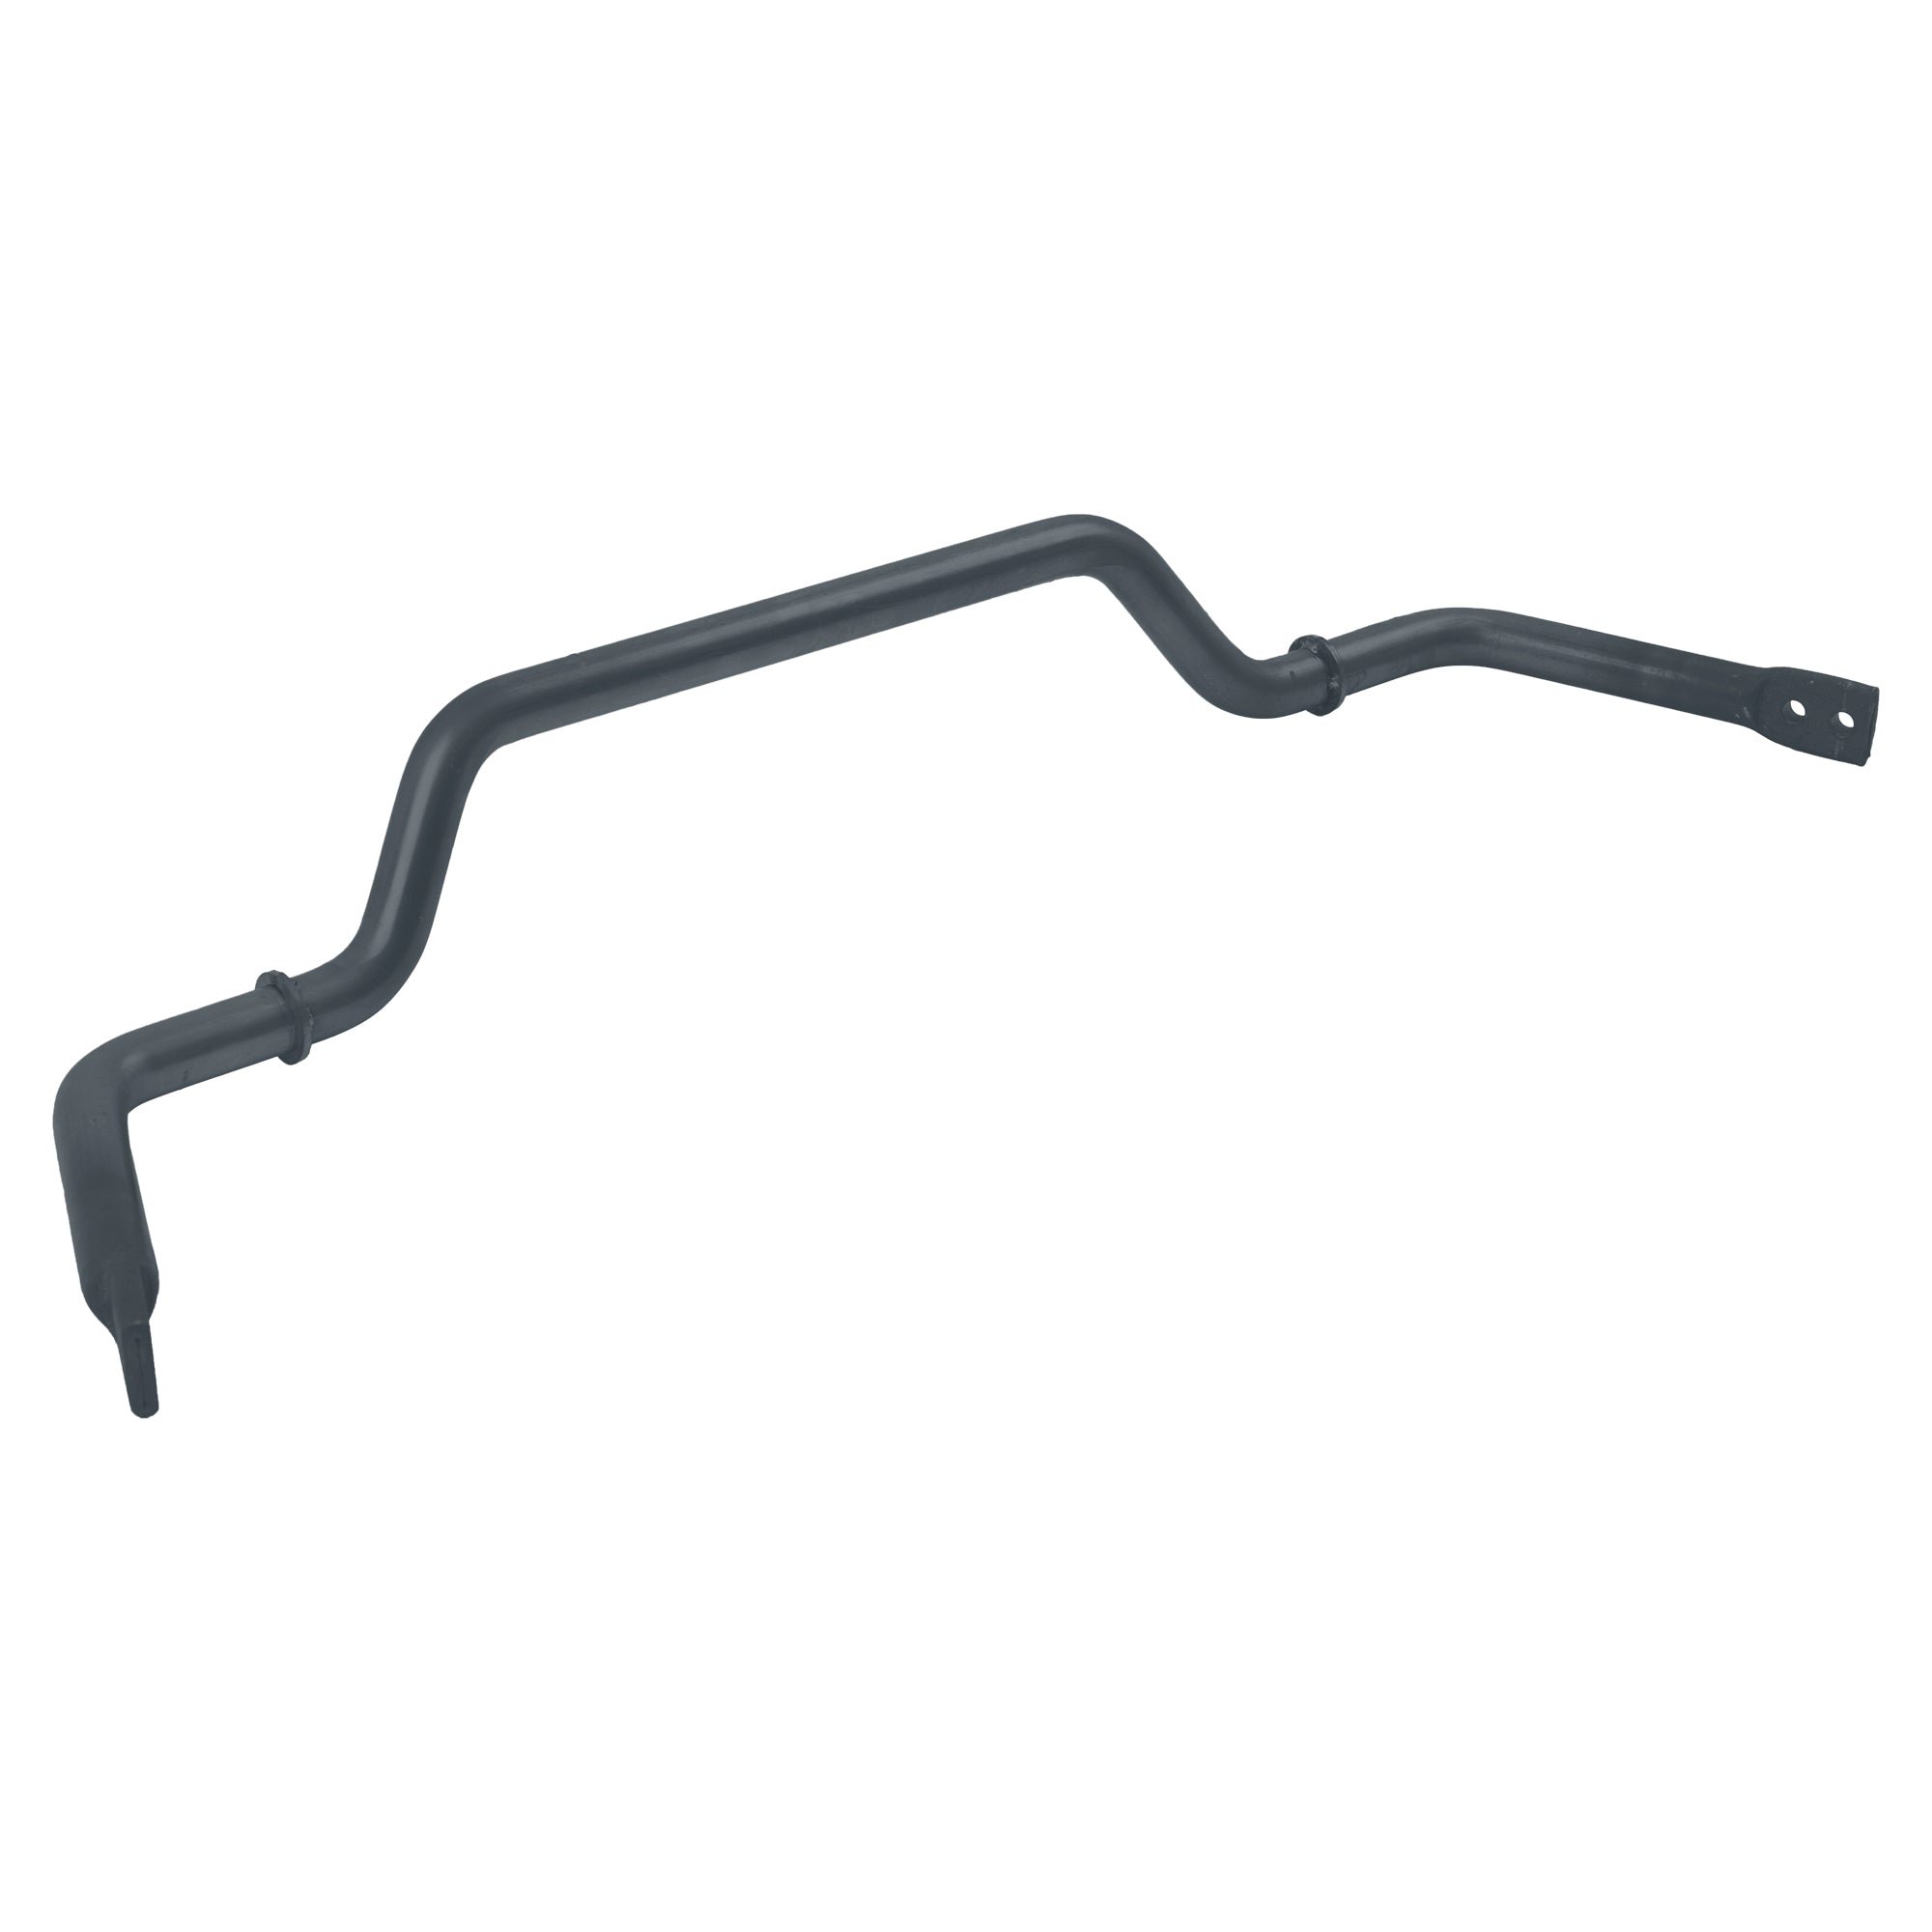 1 3/8" / 35mm Front Anti-Sway Bar w/ Hardware